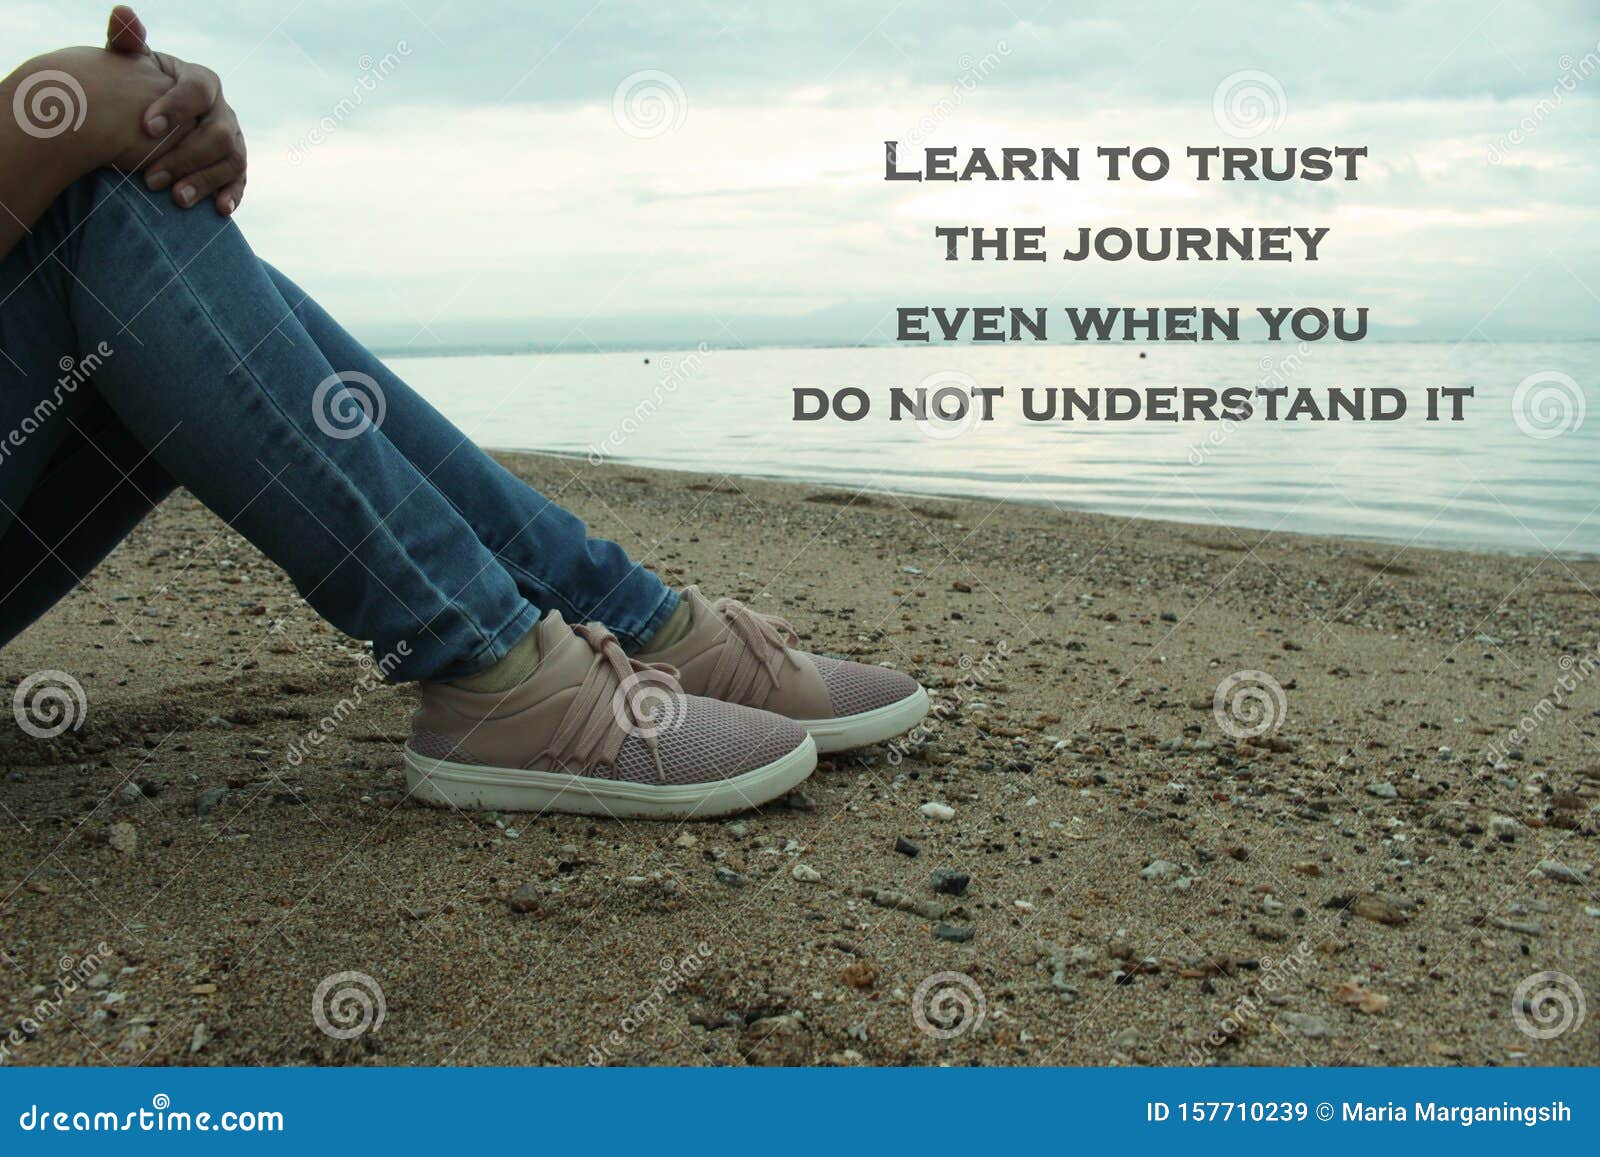 inspirational motivational quote-learn to trust the journey, even when you do not understand it.